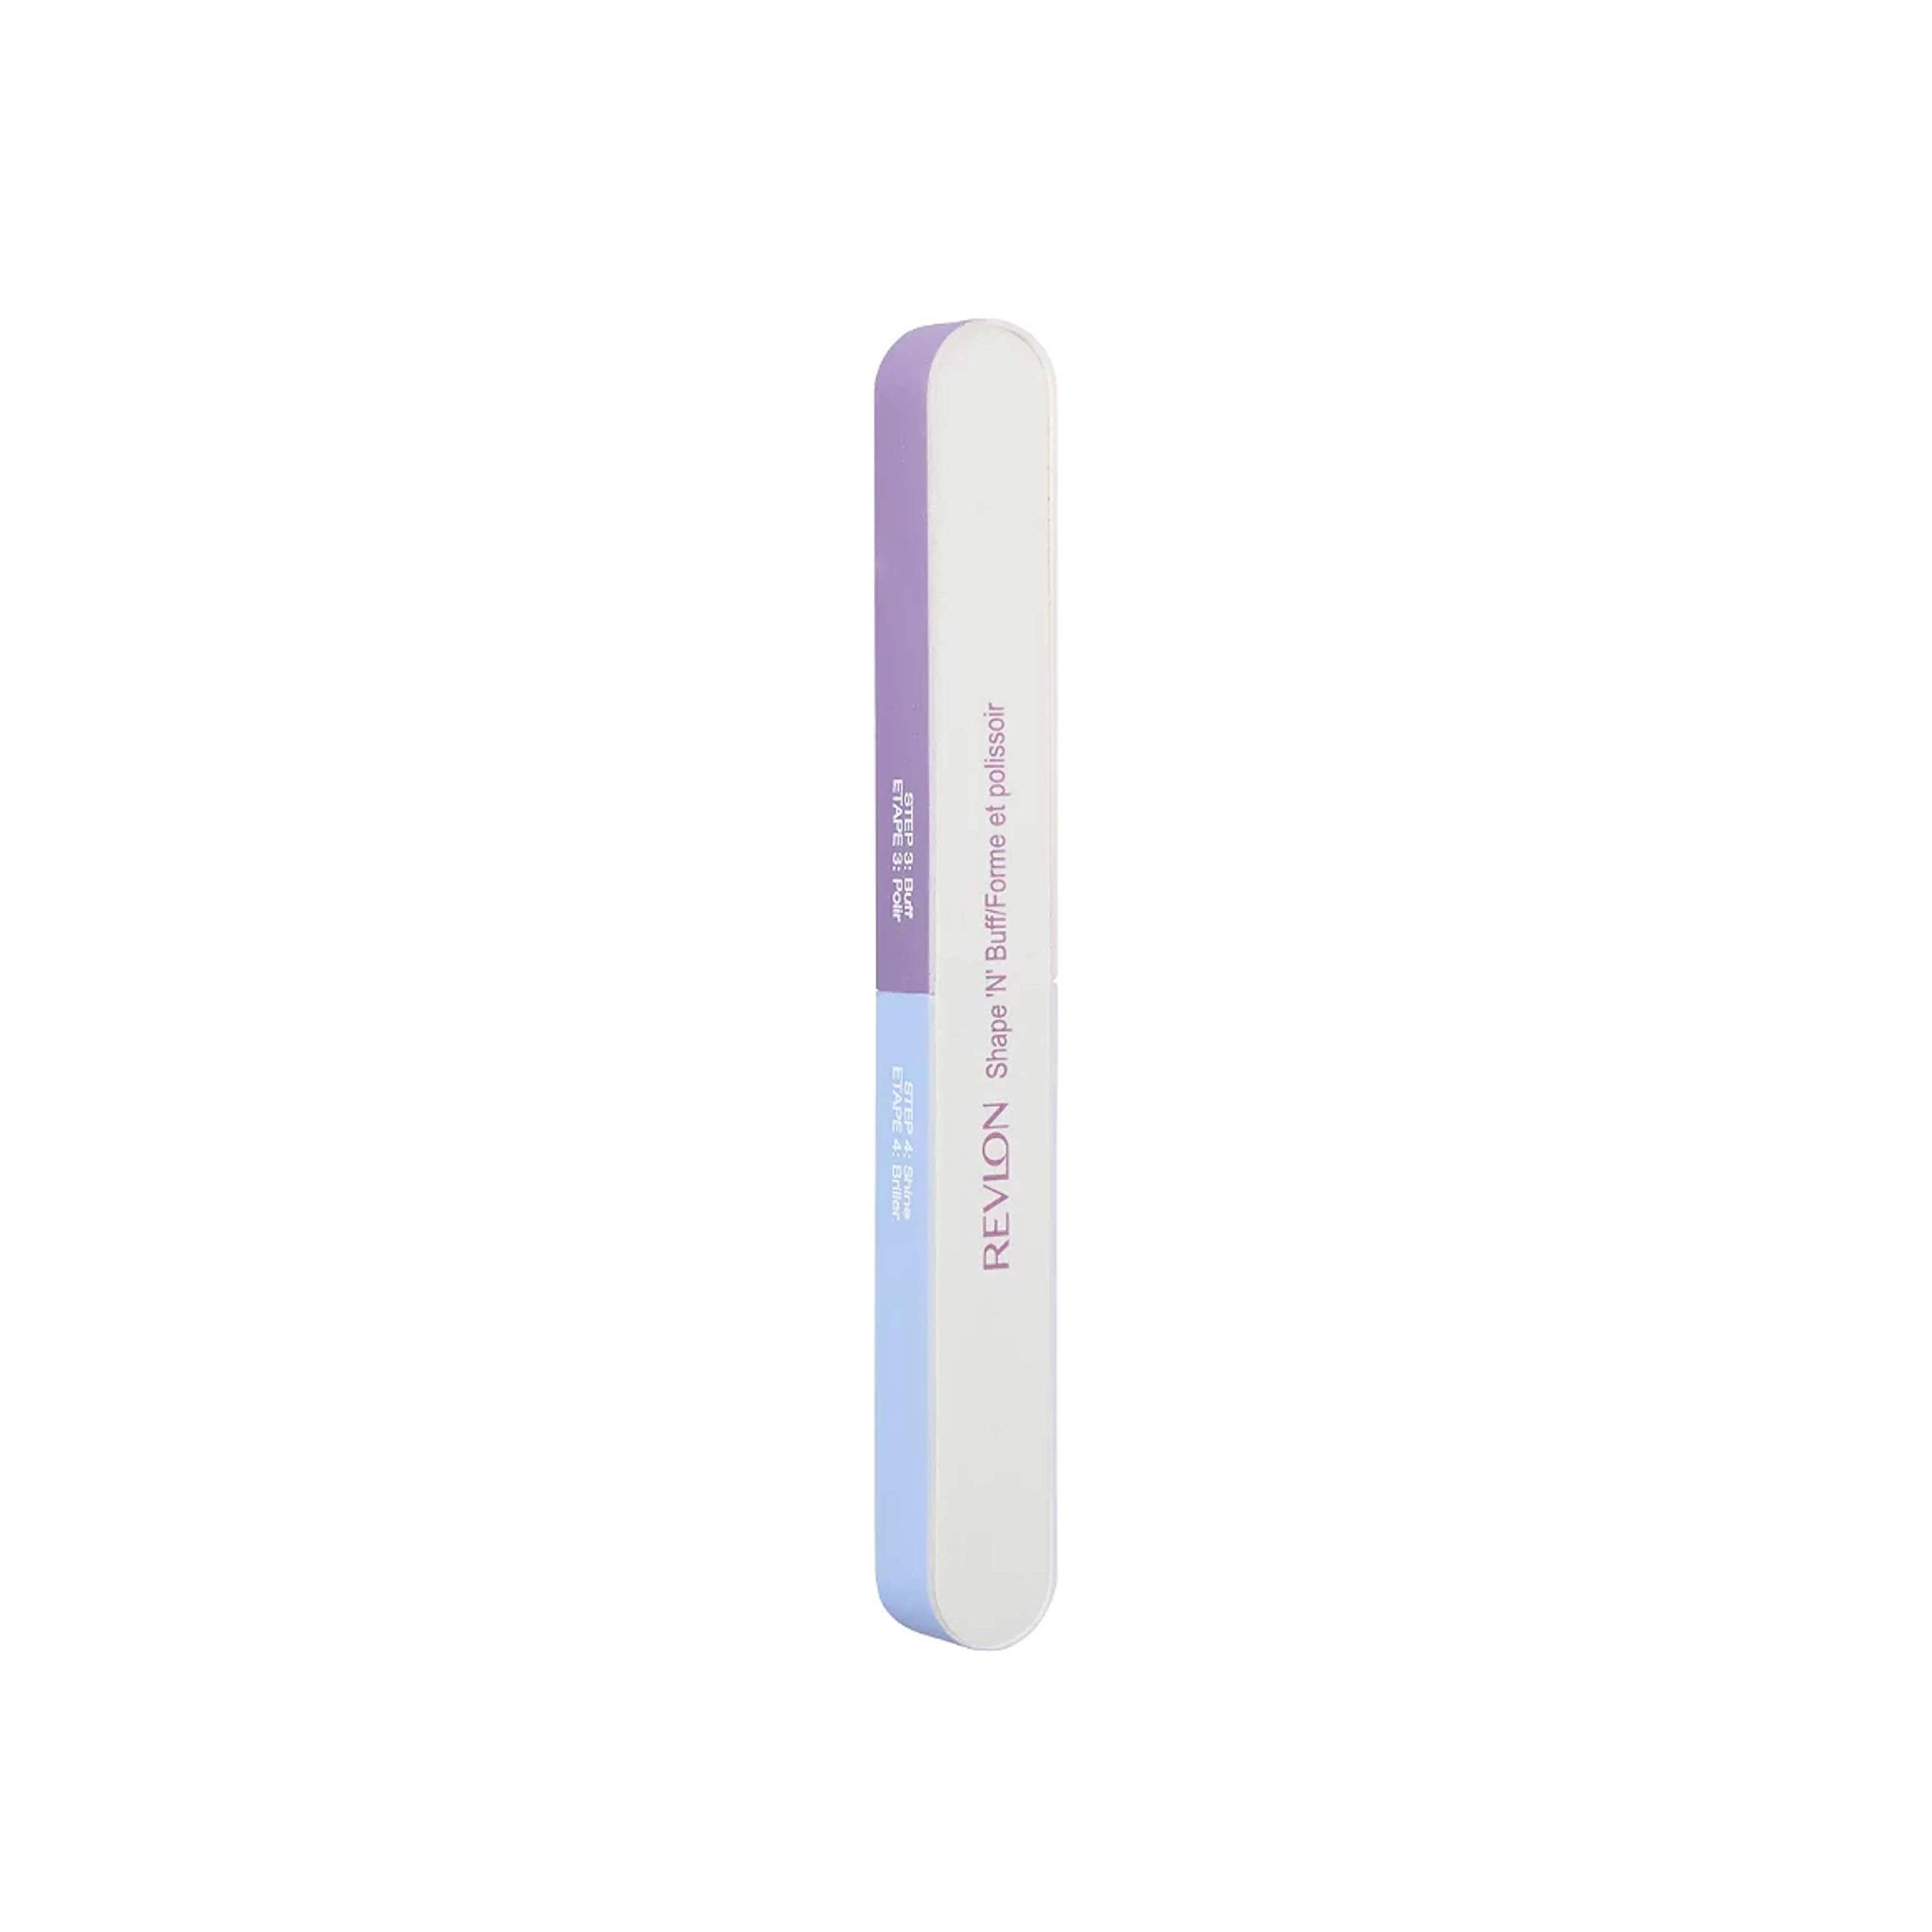 Revlon Nail Buffer, Shape 'N' Buff Nail File & Buffer, Nail Care Tool, All-in-One Shaping & Buffing, Easy to Use (Pack of 1)